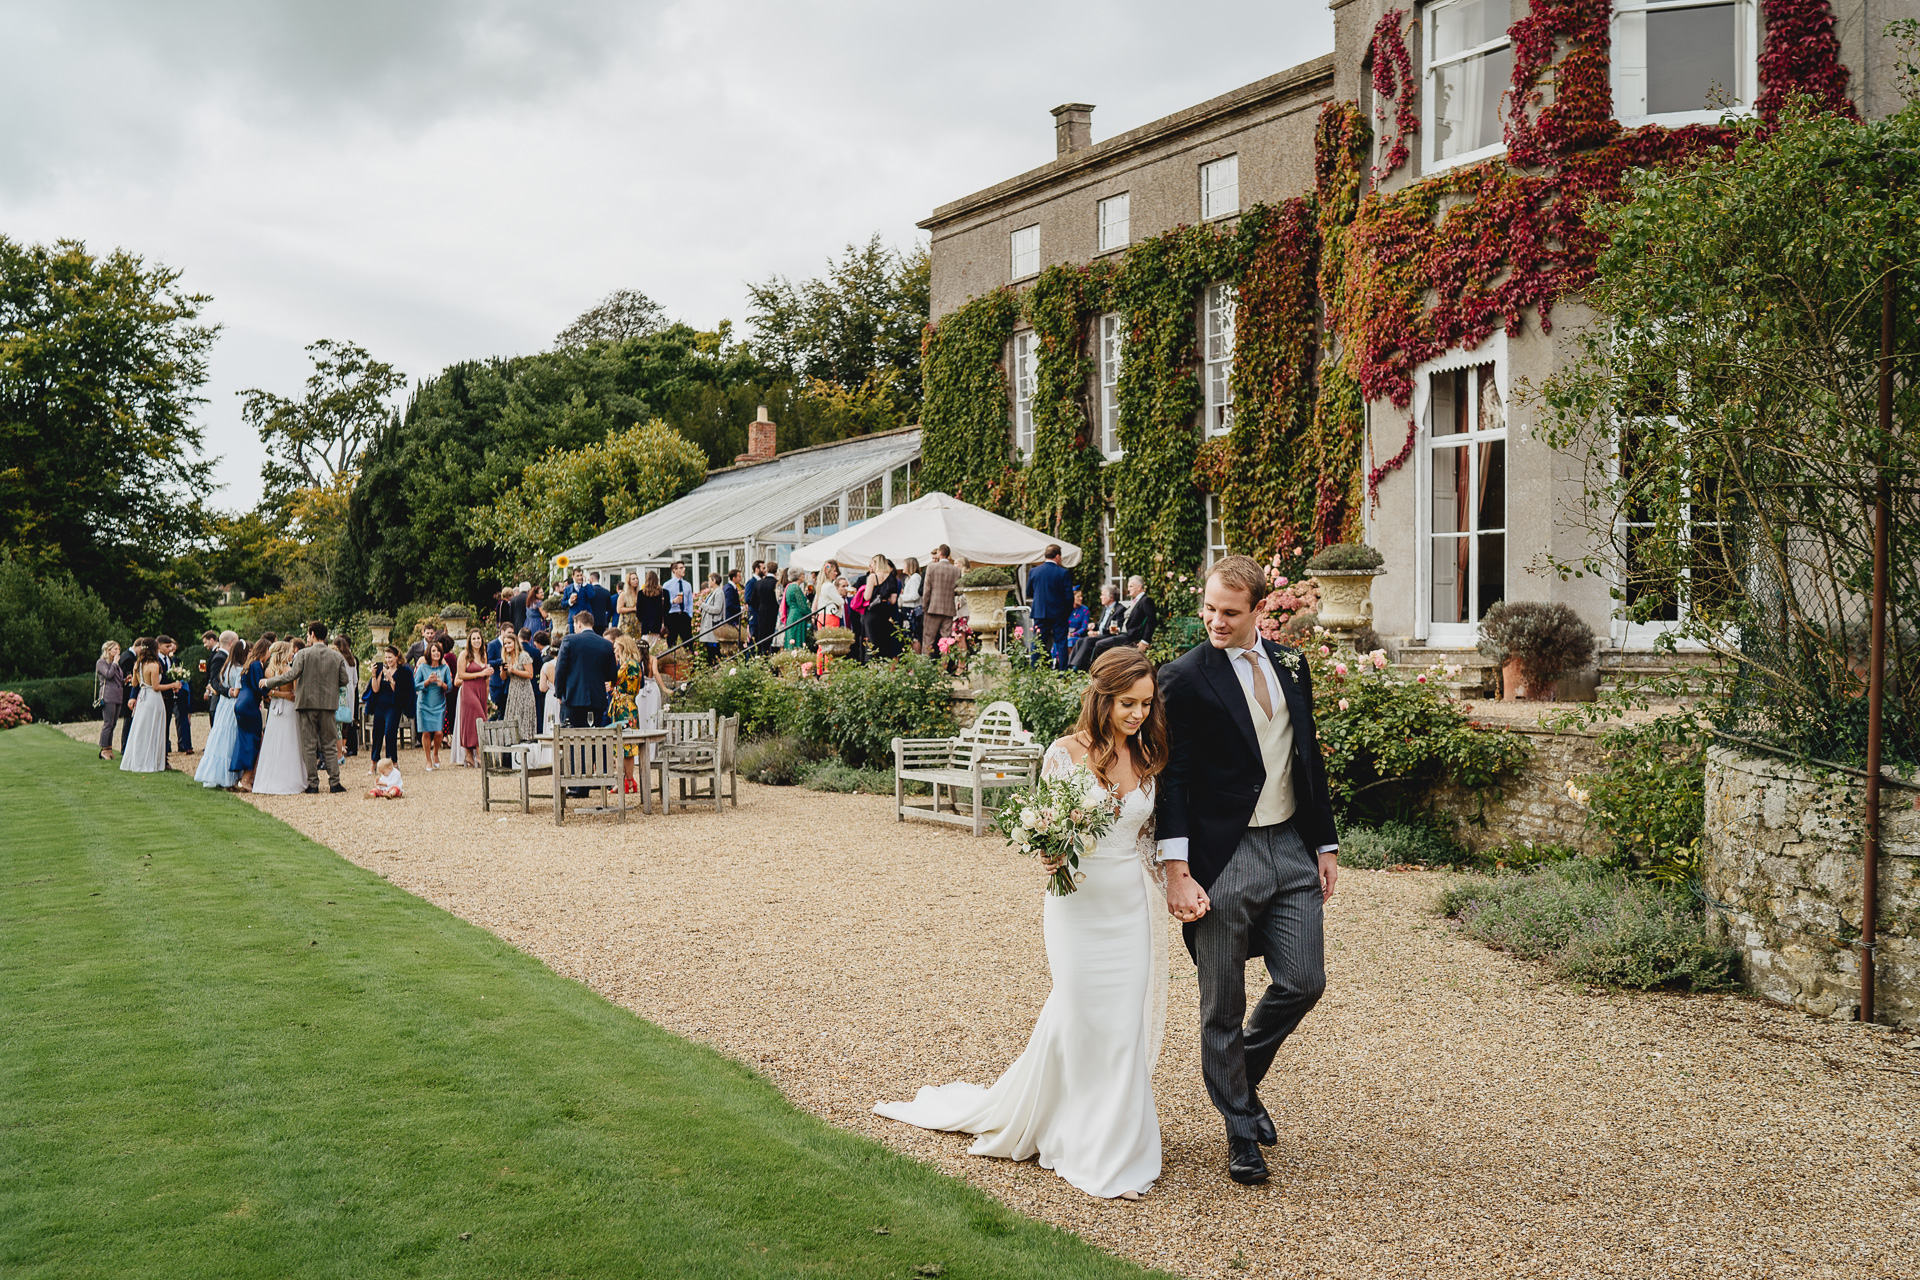 Bride and groom walking in front of guests at Pennard House